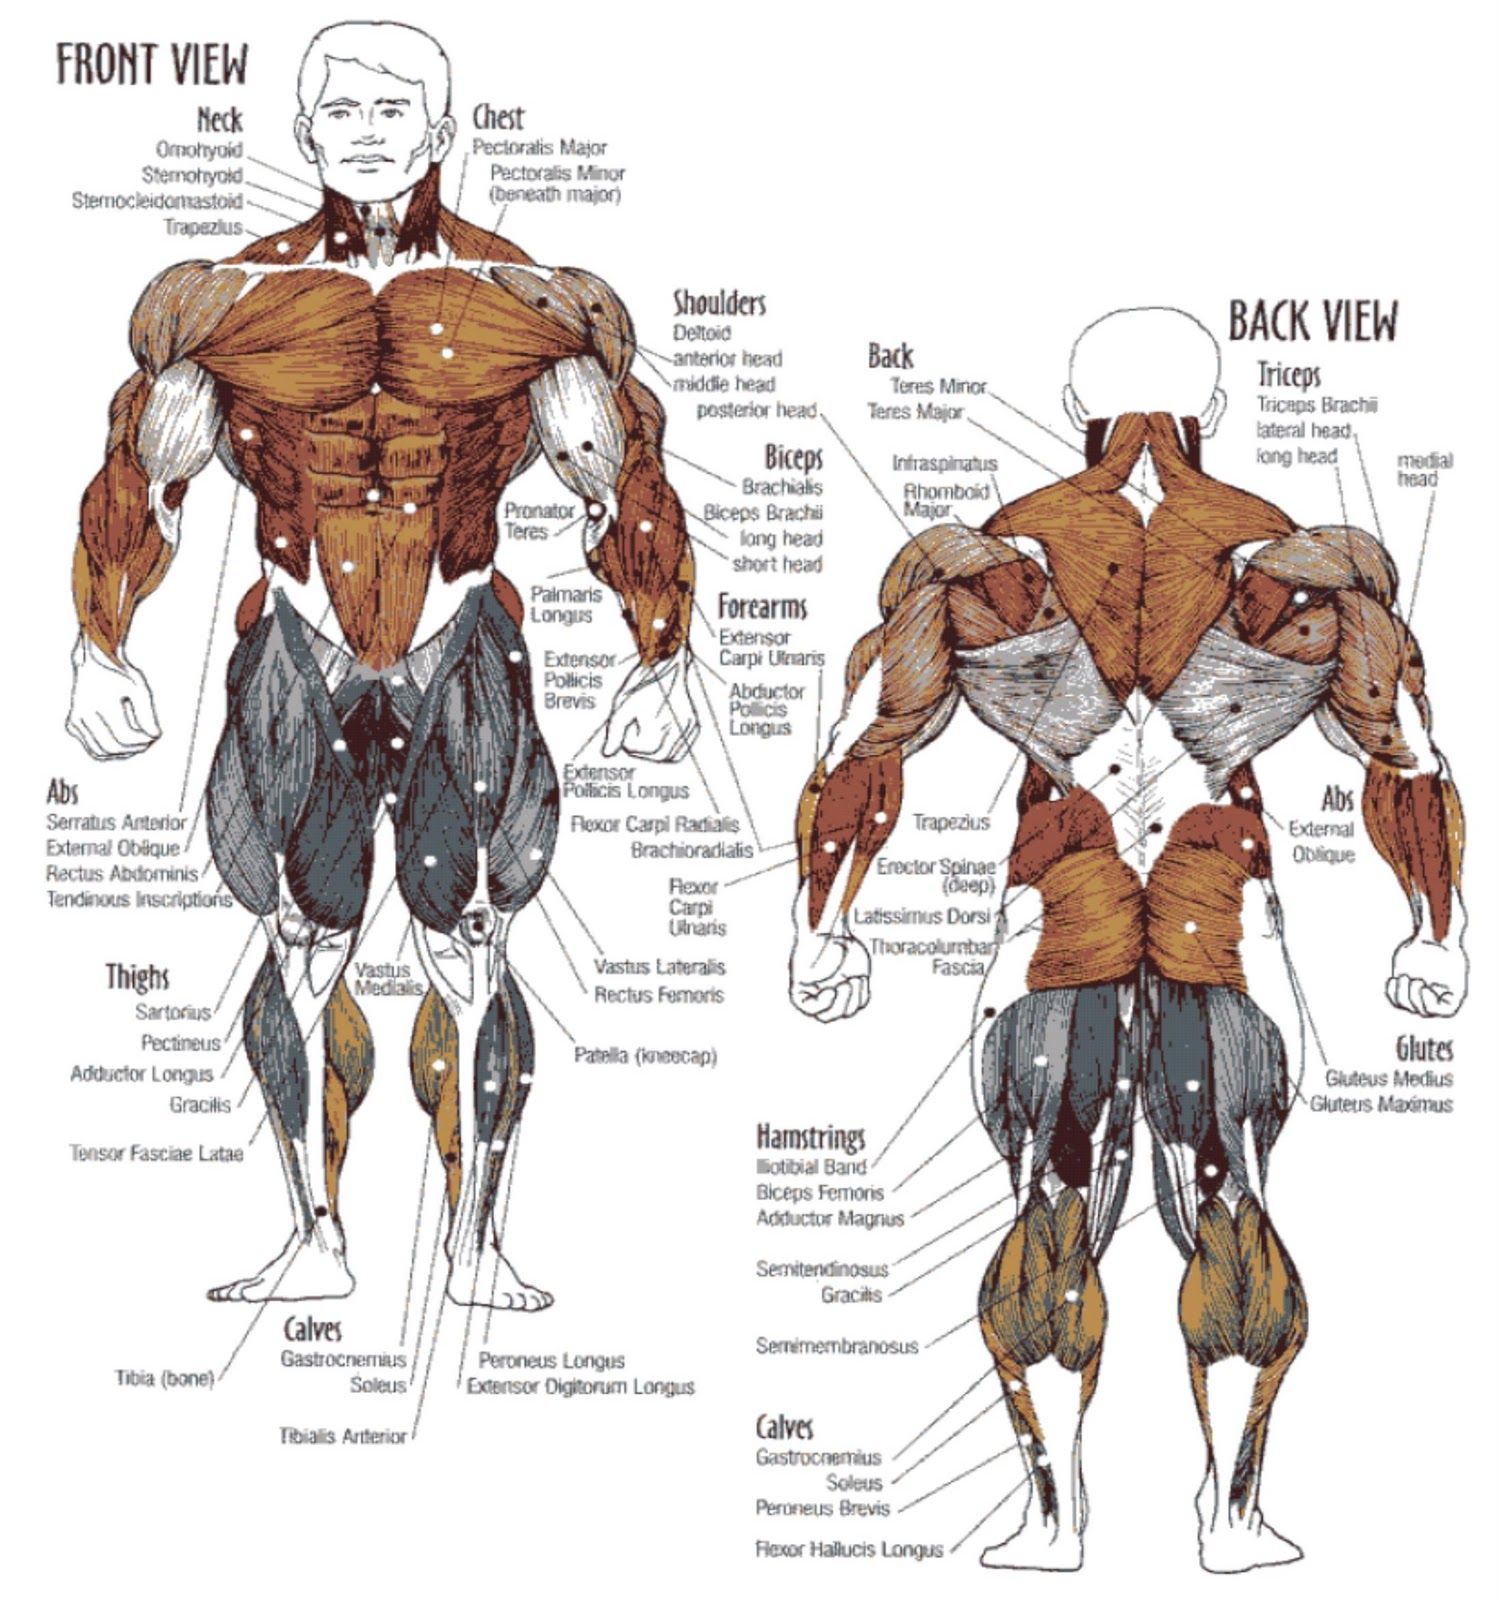 Muscle Workouts - Staggering Muscle Groups for Maximum Benefits - Bodydulding